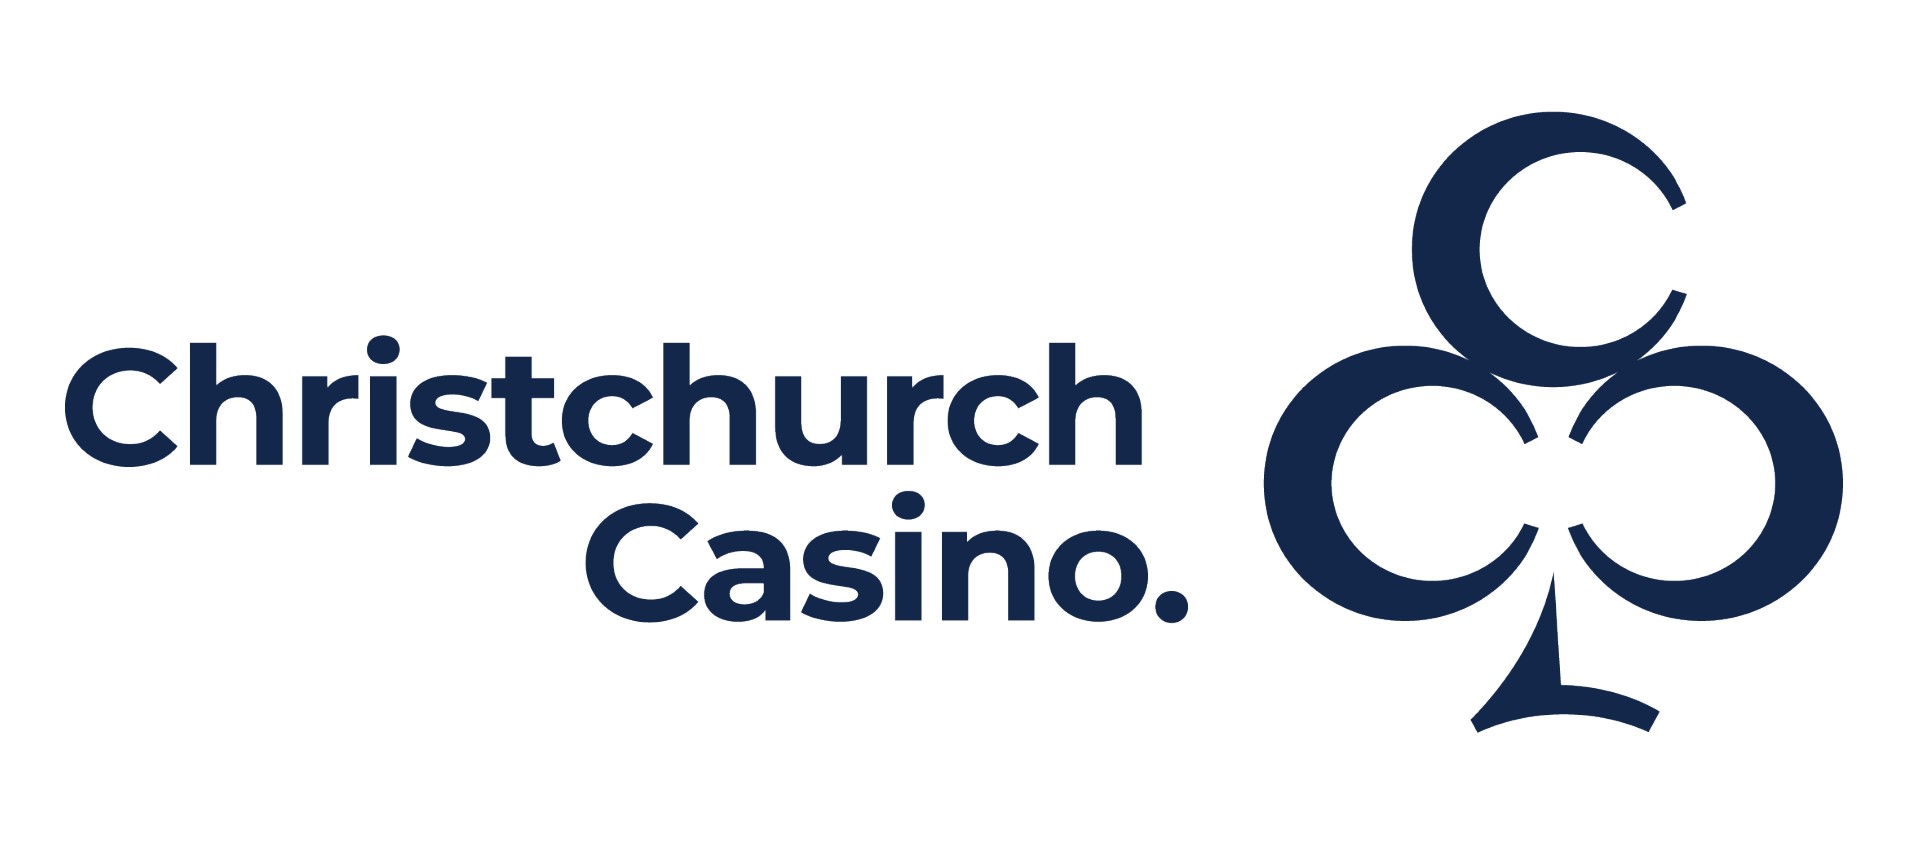 blue text christchurch casino outline of clubs symbol all on white background